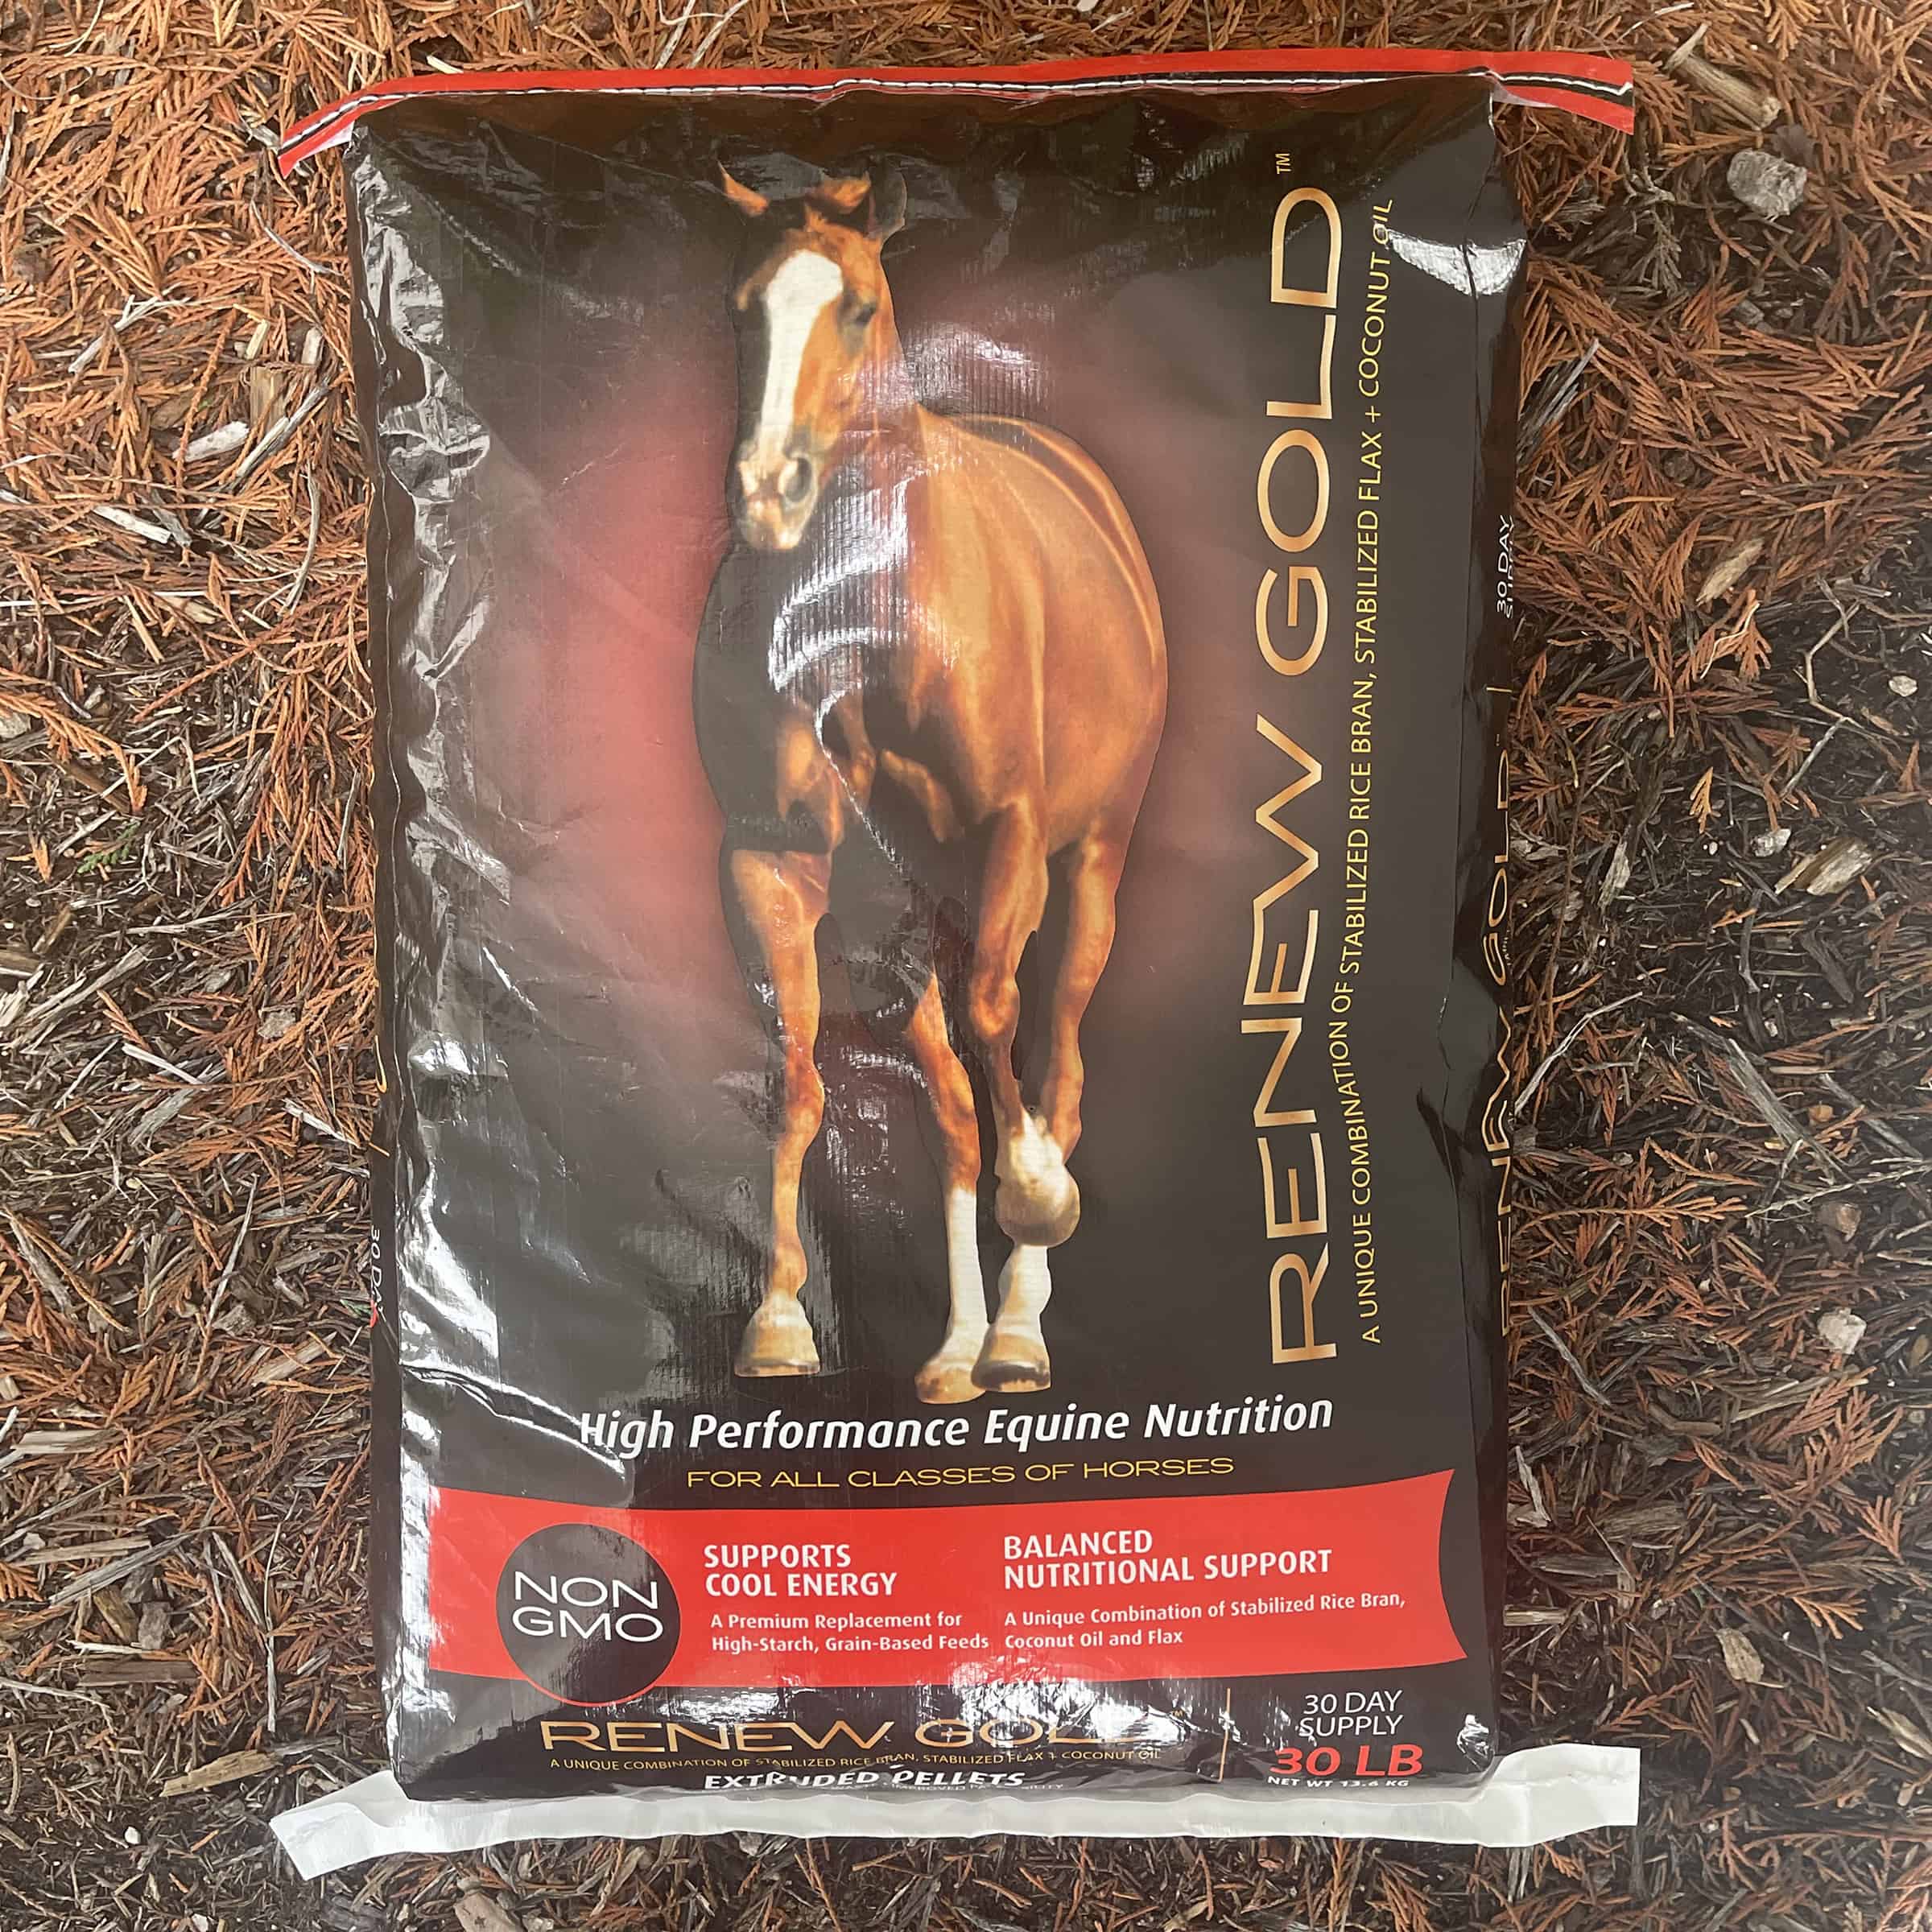 Renew Gold Equine Nutrition